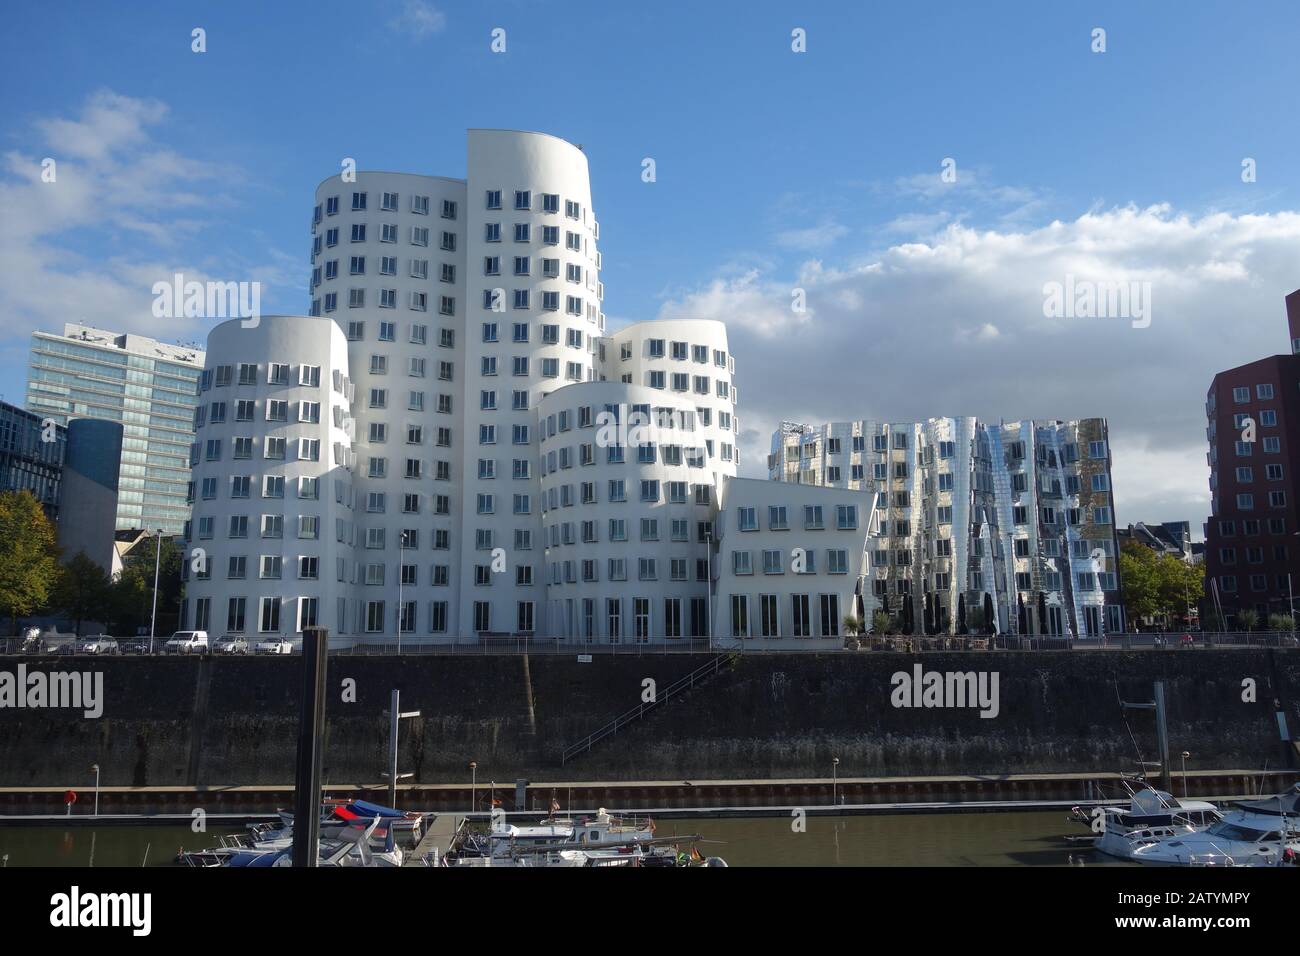 The Neuer Zollhof buildings, designed by American architect Frank O. Gehry, located next to Dusseldorf Harbour. Stock Photo